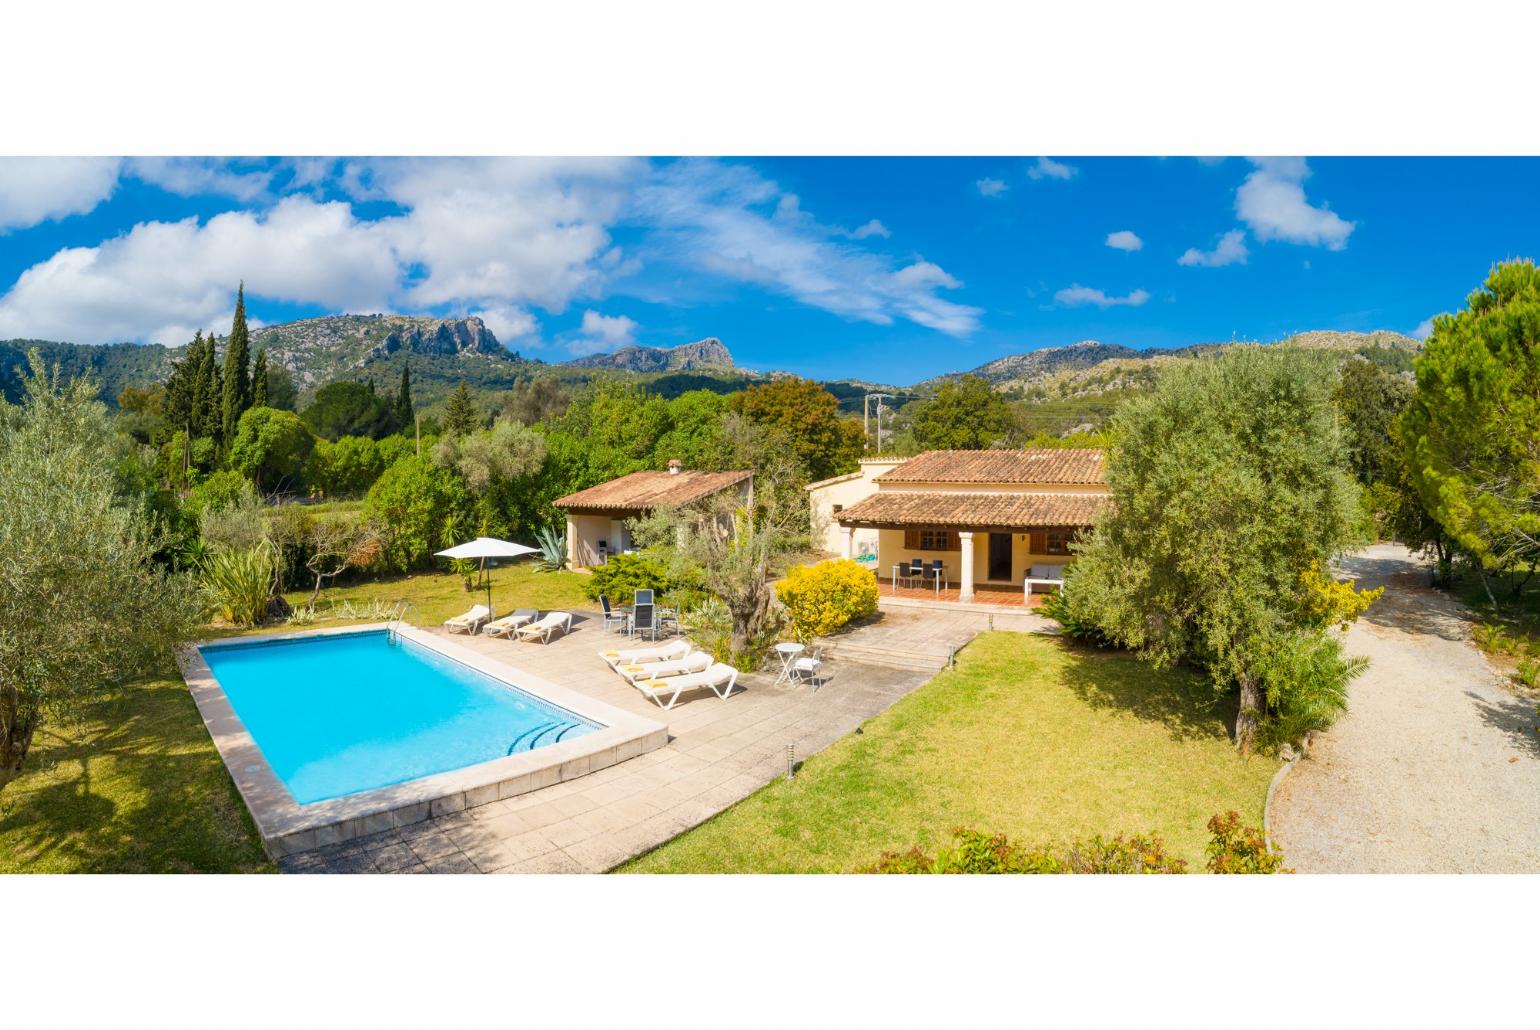 Beautiful villa with private pool and terrace with mountain views